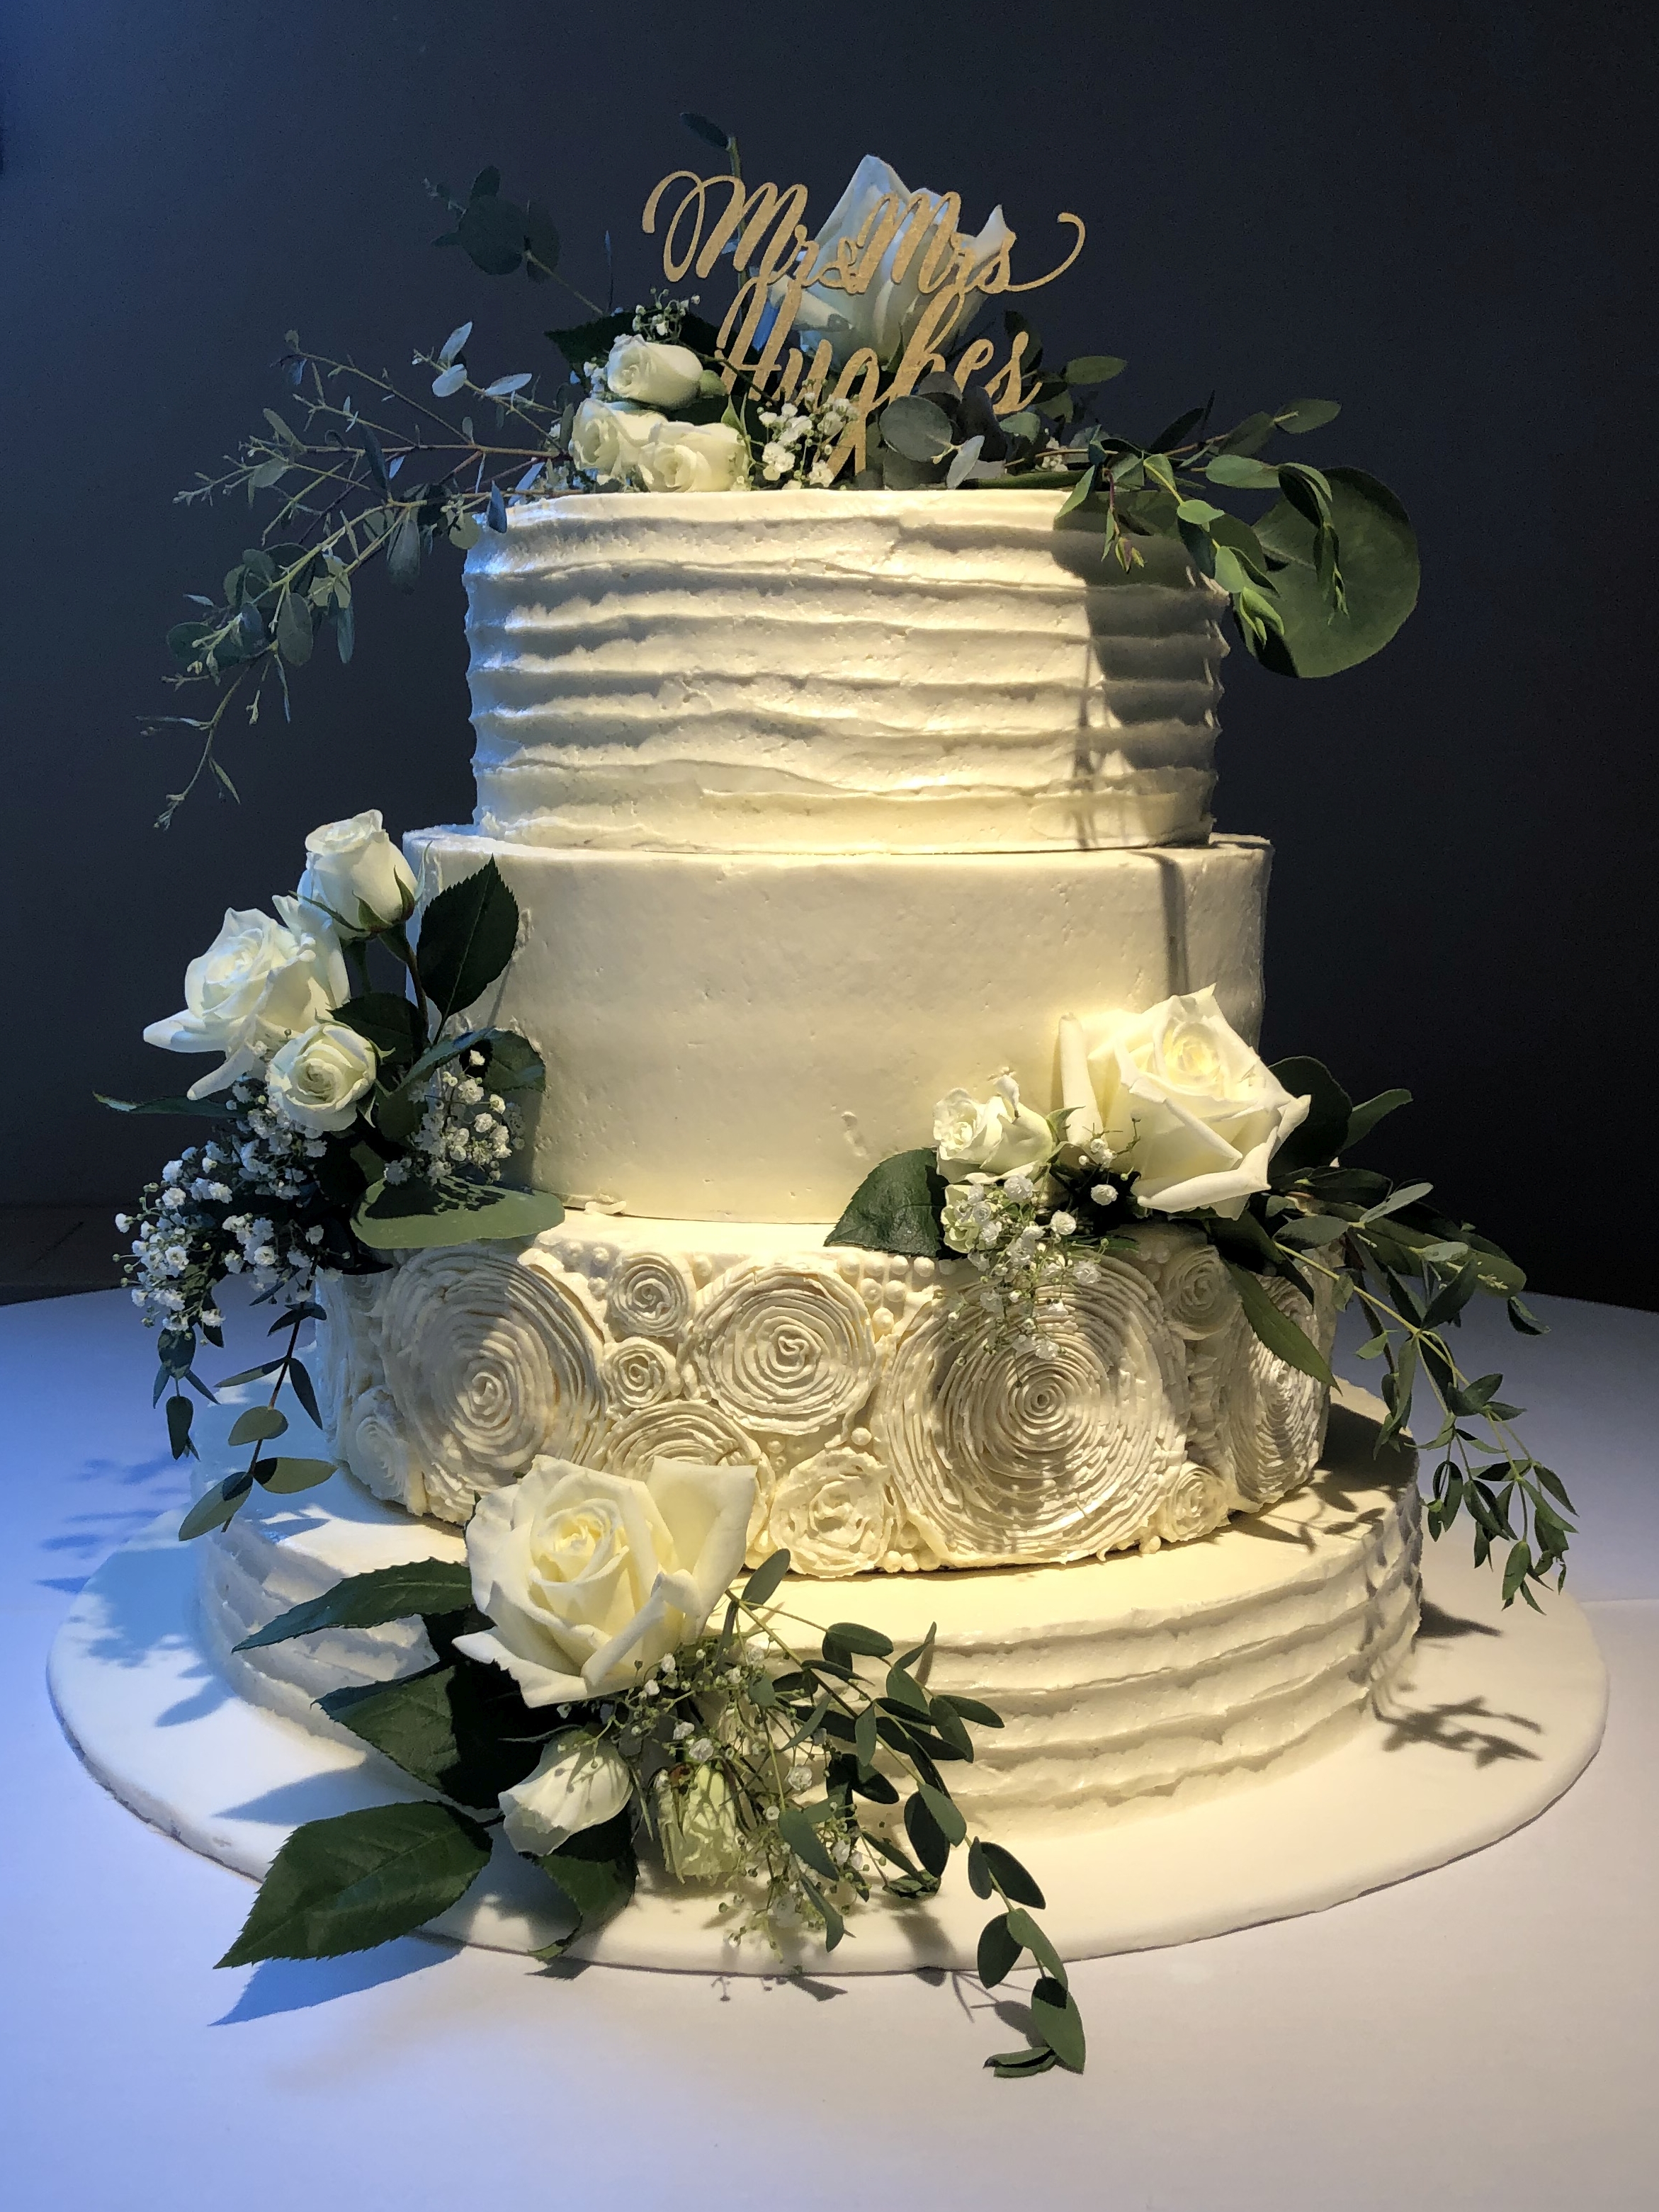 A beautiful 4-tier custom wedding cake with horizontal texture and live flowers from Village Patisserie in Toledo, Ohio